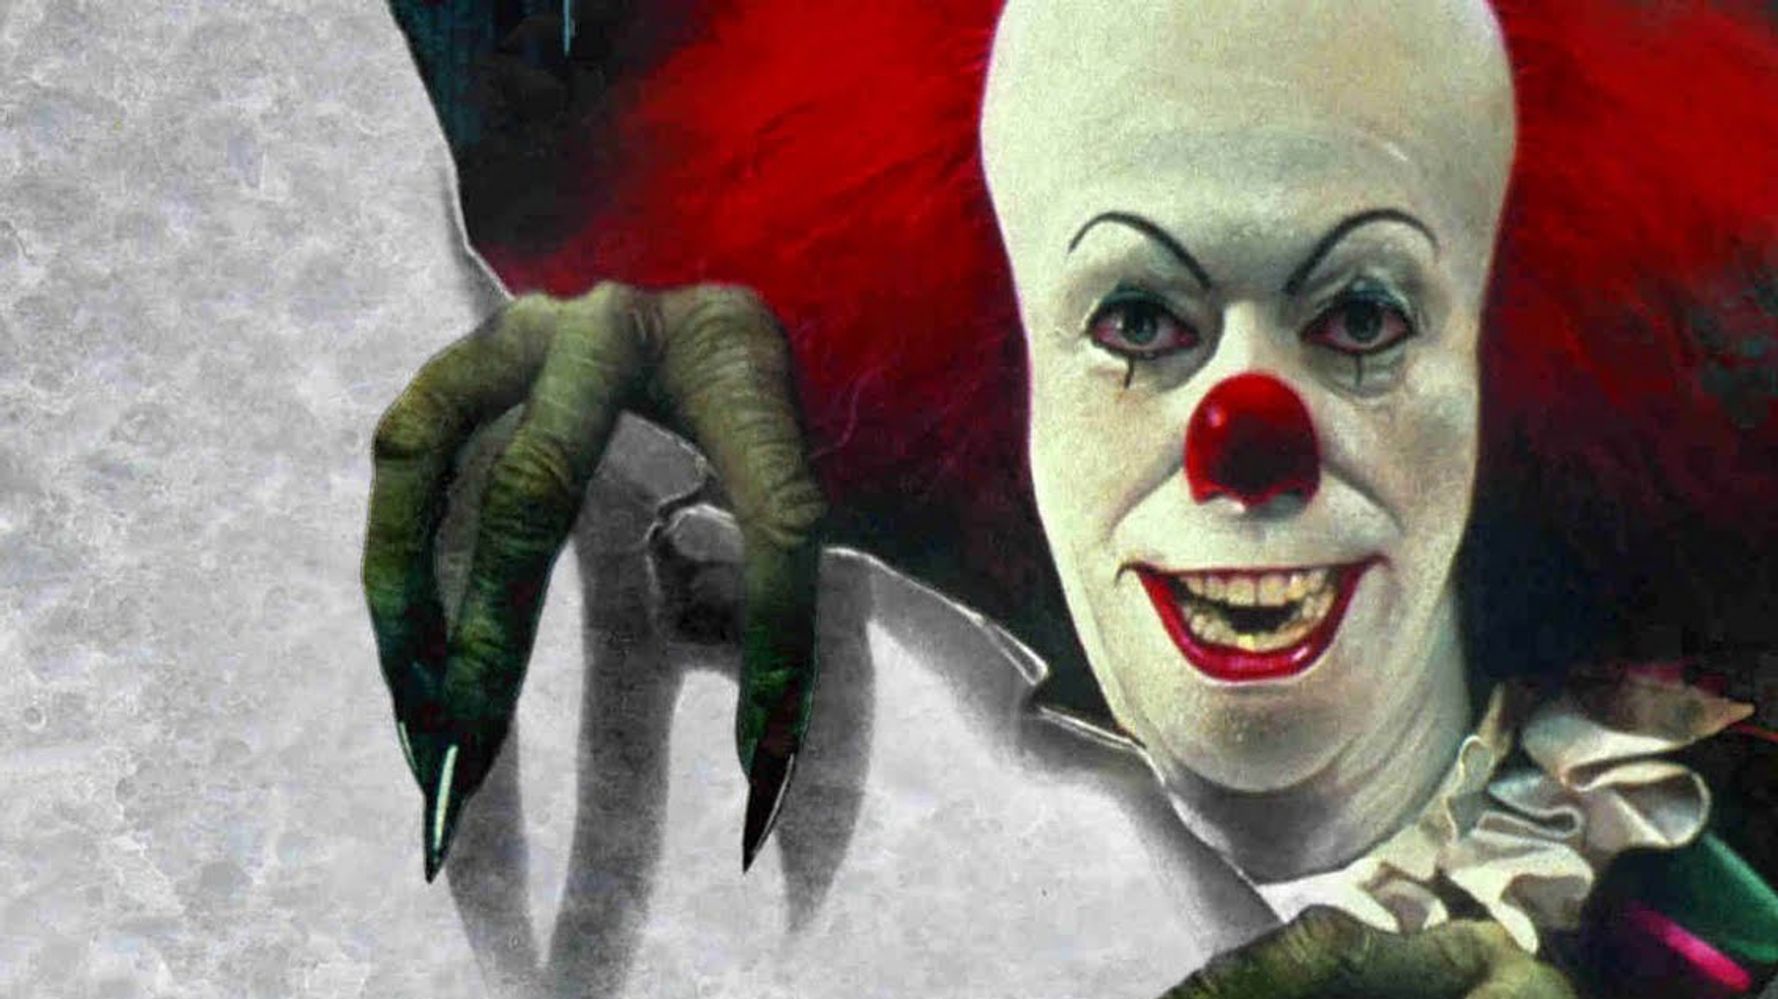 The First Look At Pennywise The Clown From The New 'It' Film Is ...